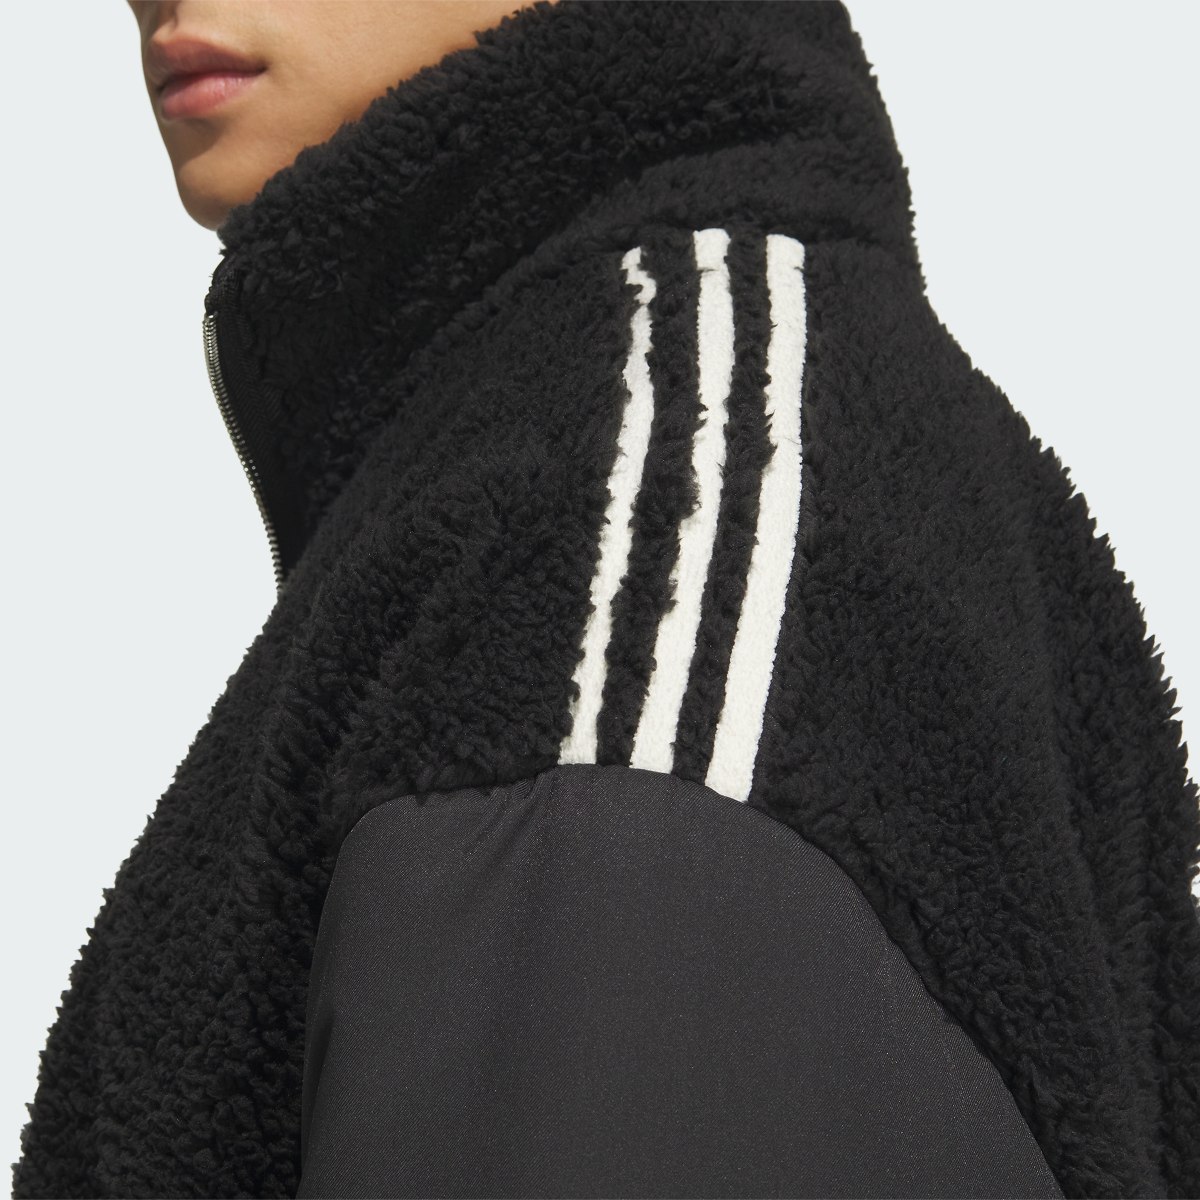 Adidas Song for the Mute Fleece Jacket (Gender Neutral). 5